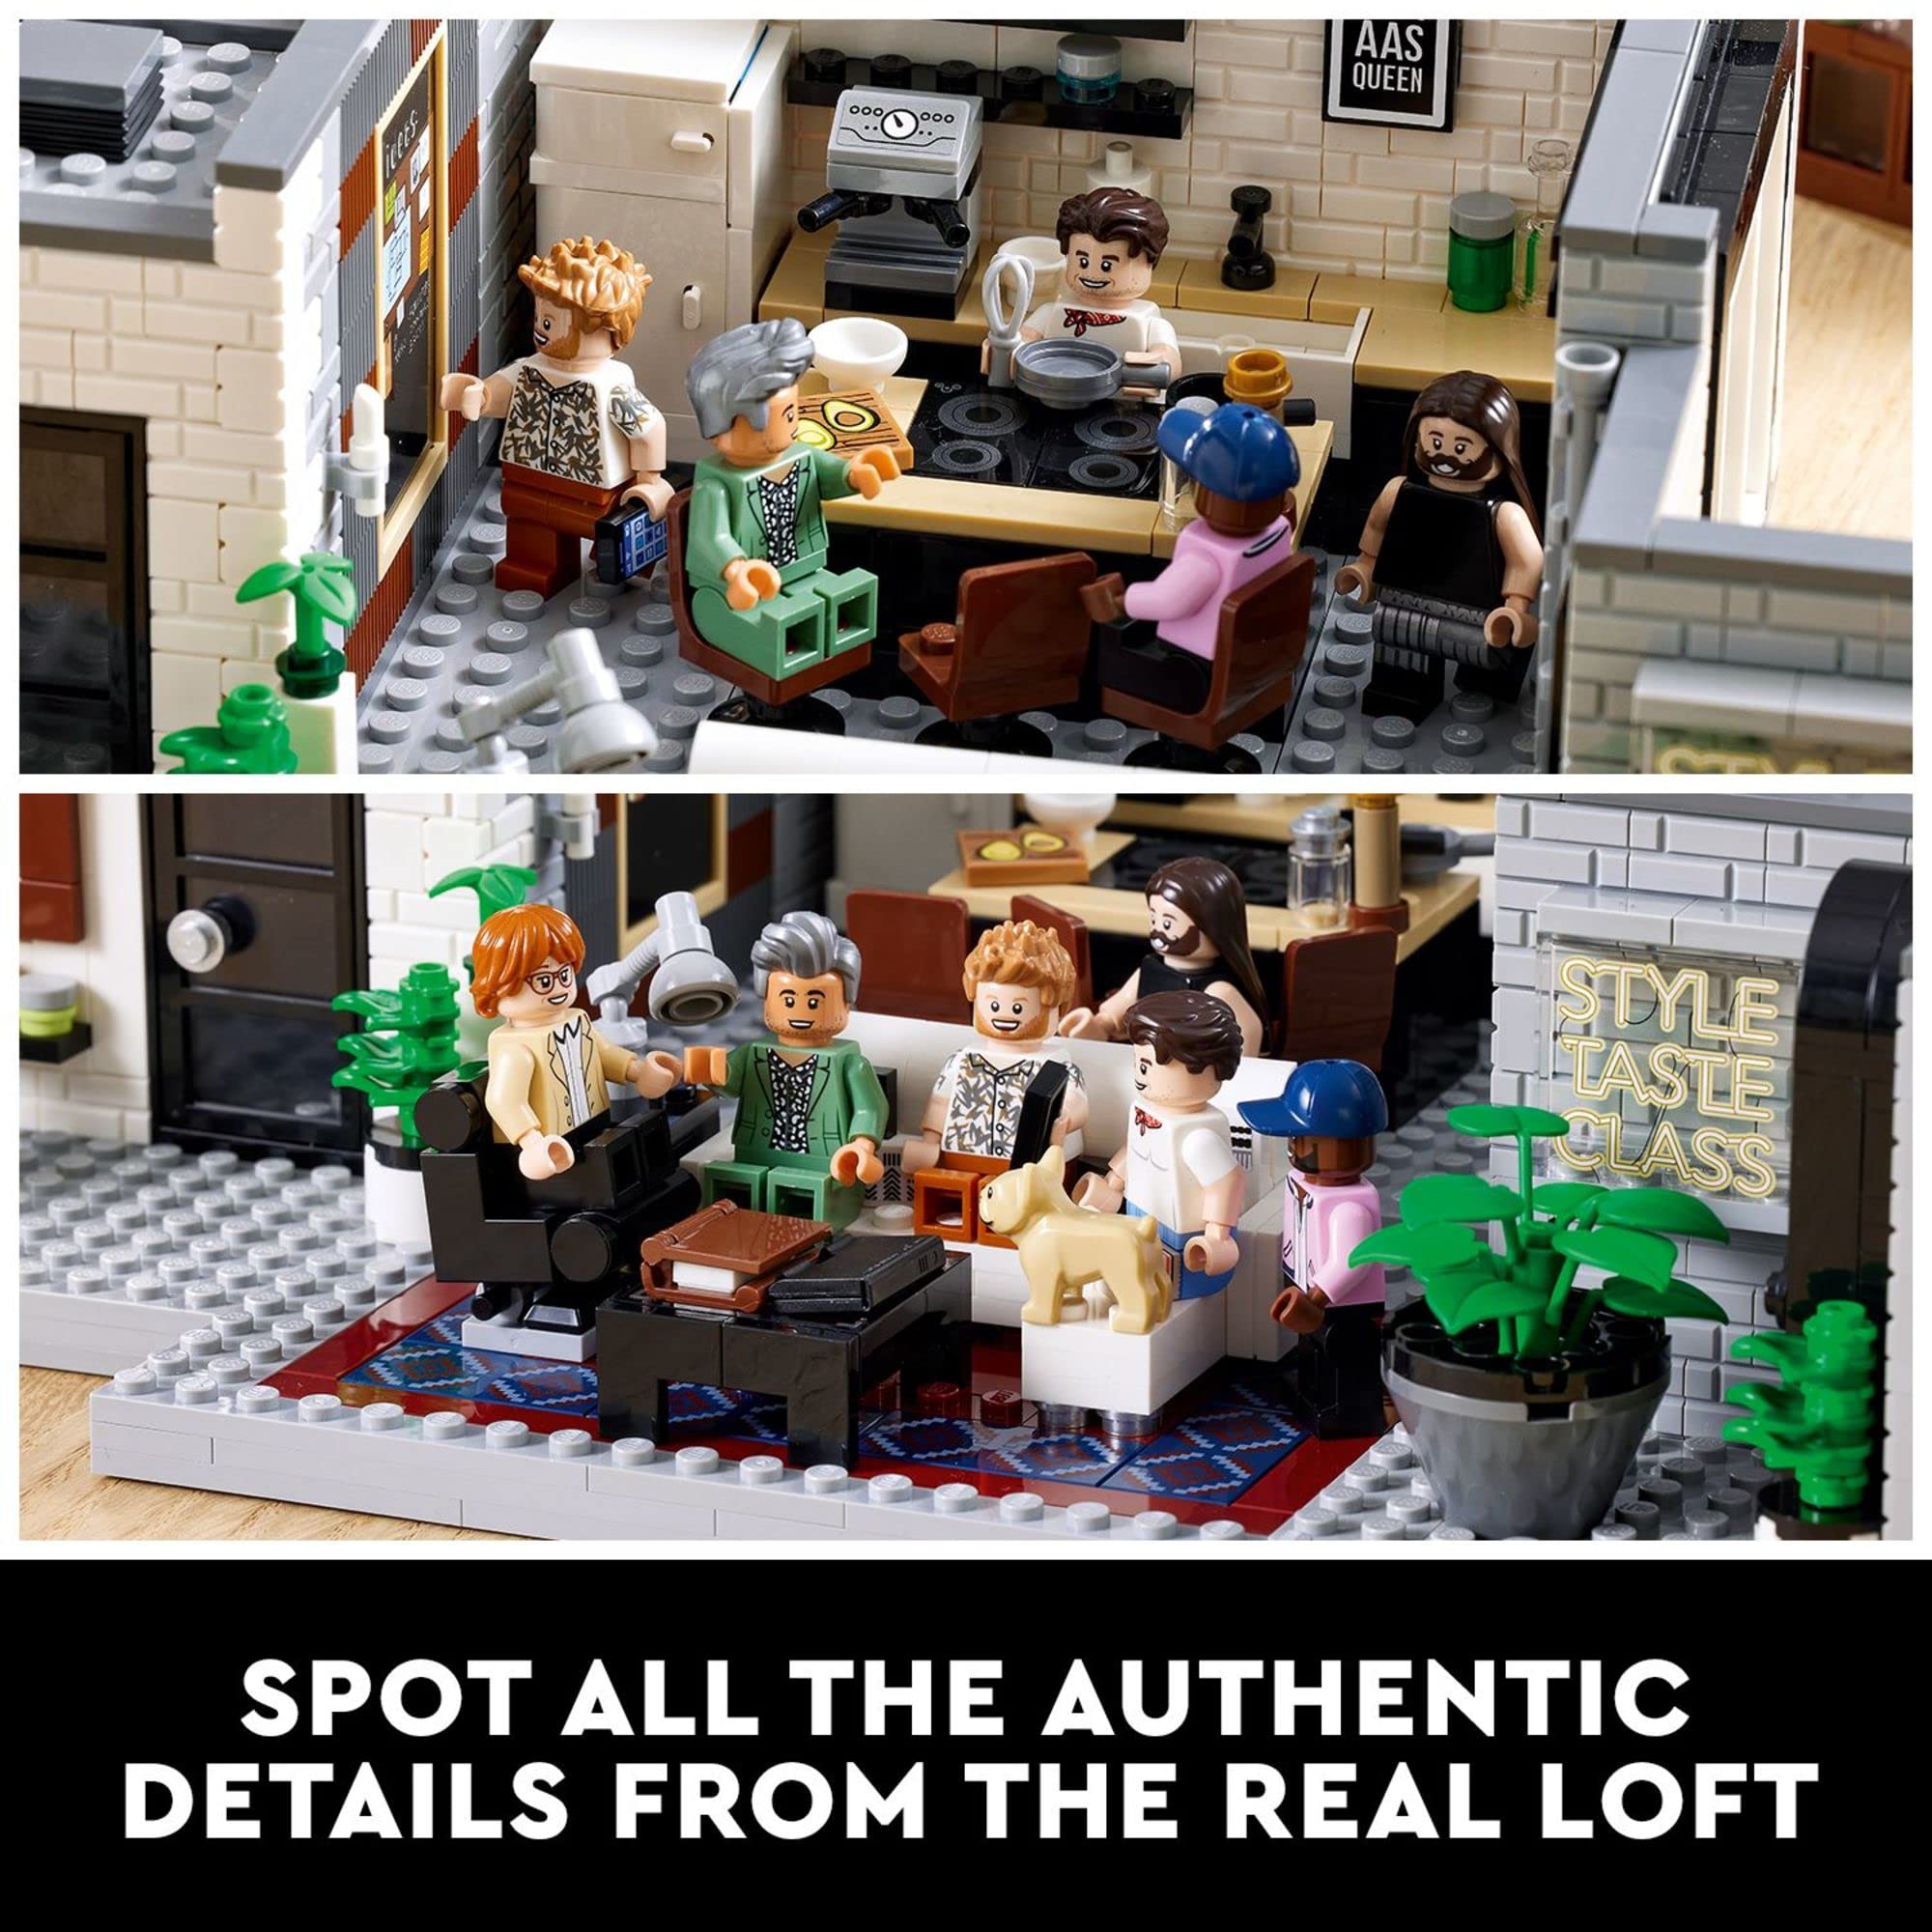 LEGO Queer Eye – The Fab 5 Loft 10291 Building Kit (974 Pieces)